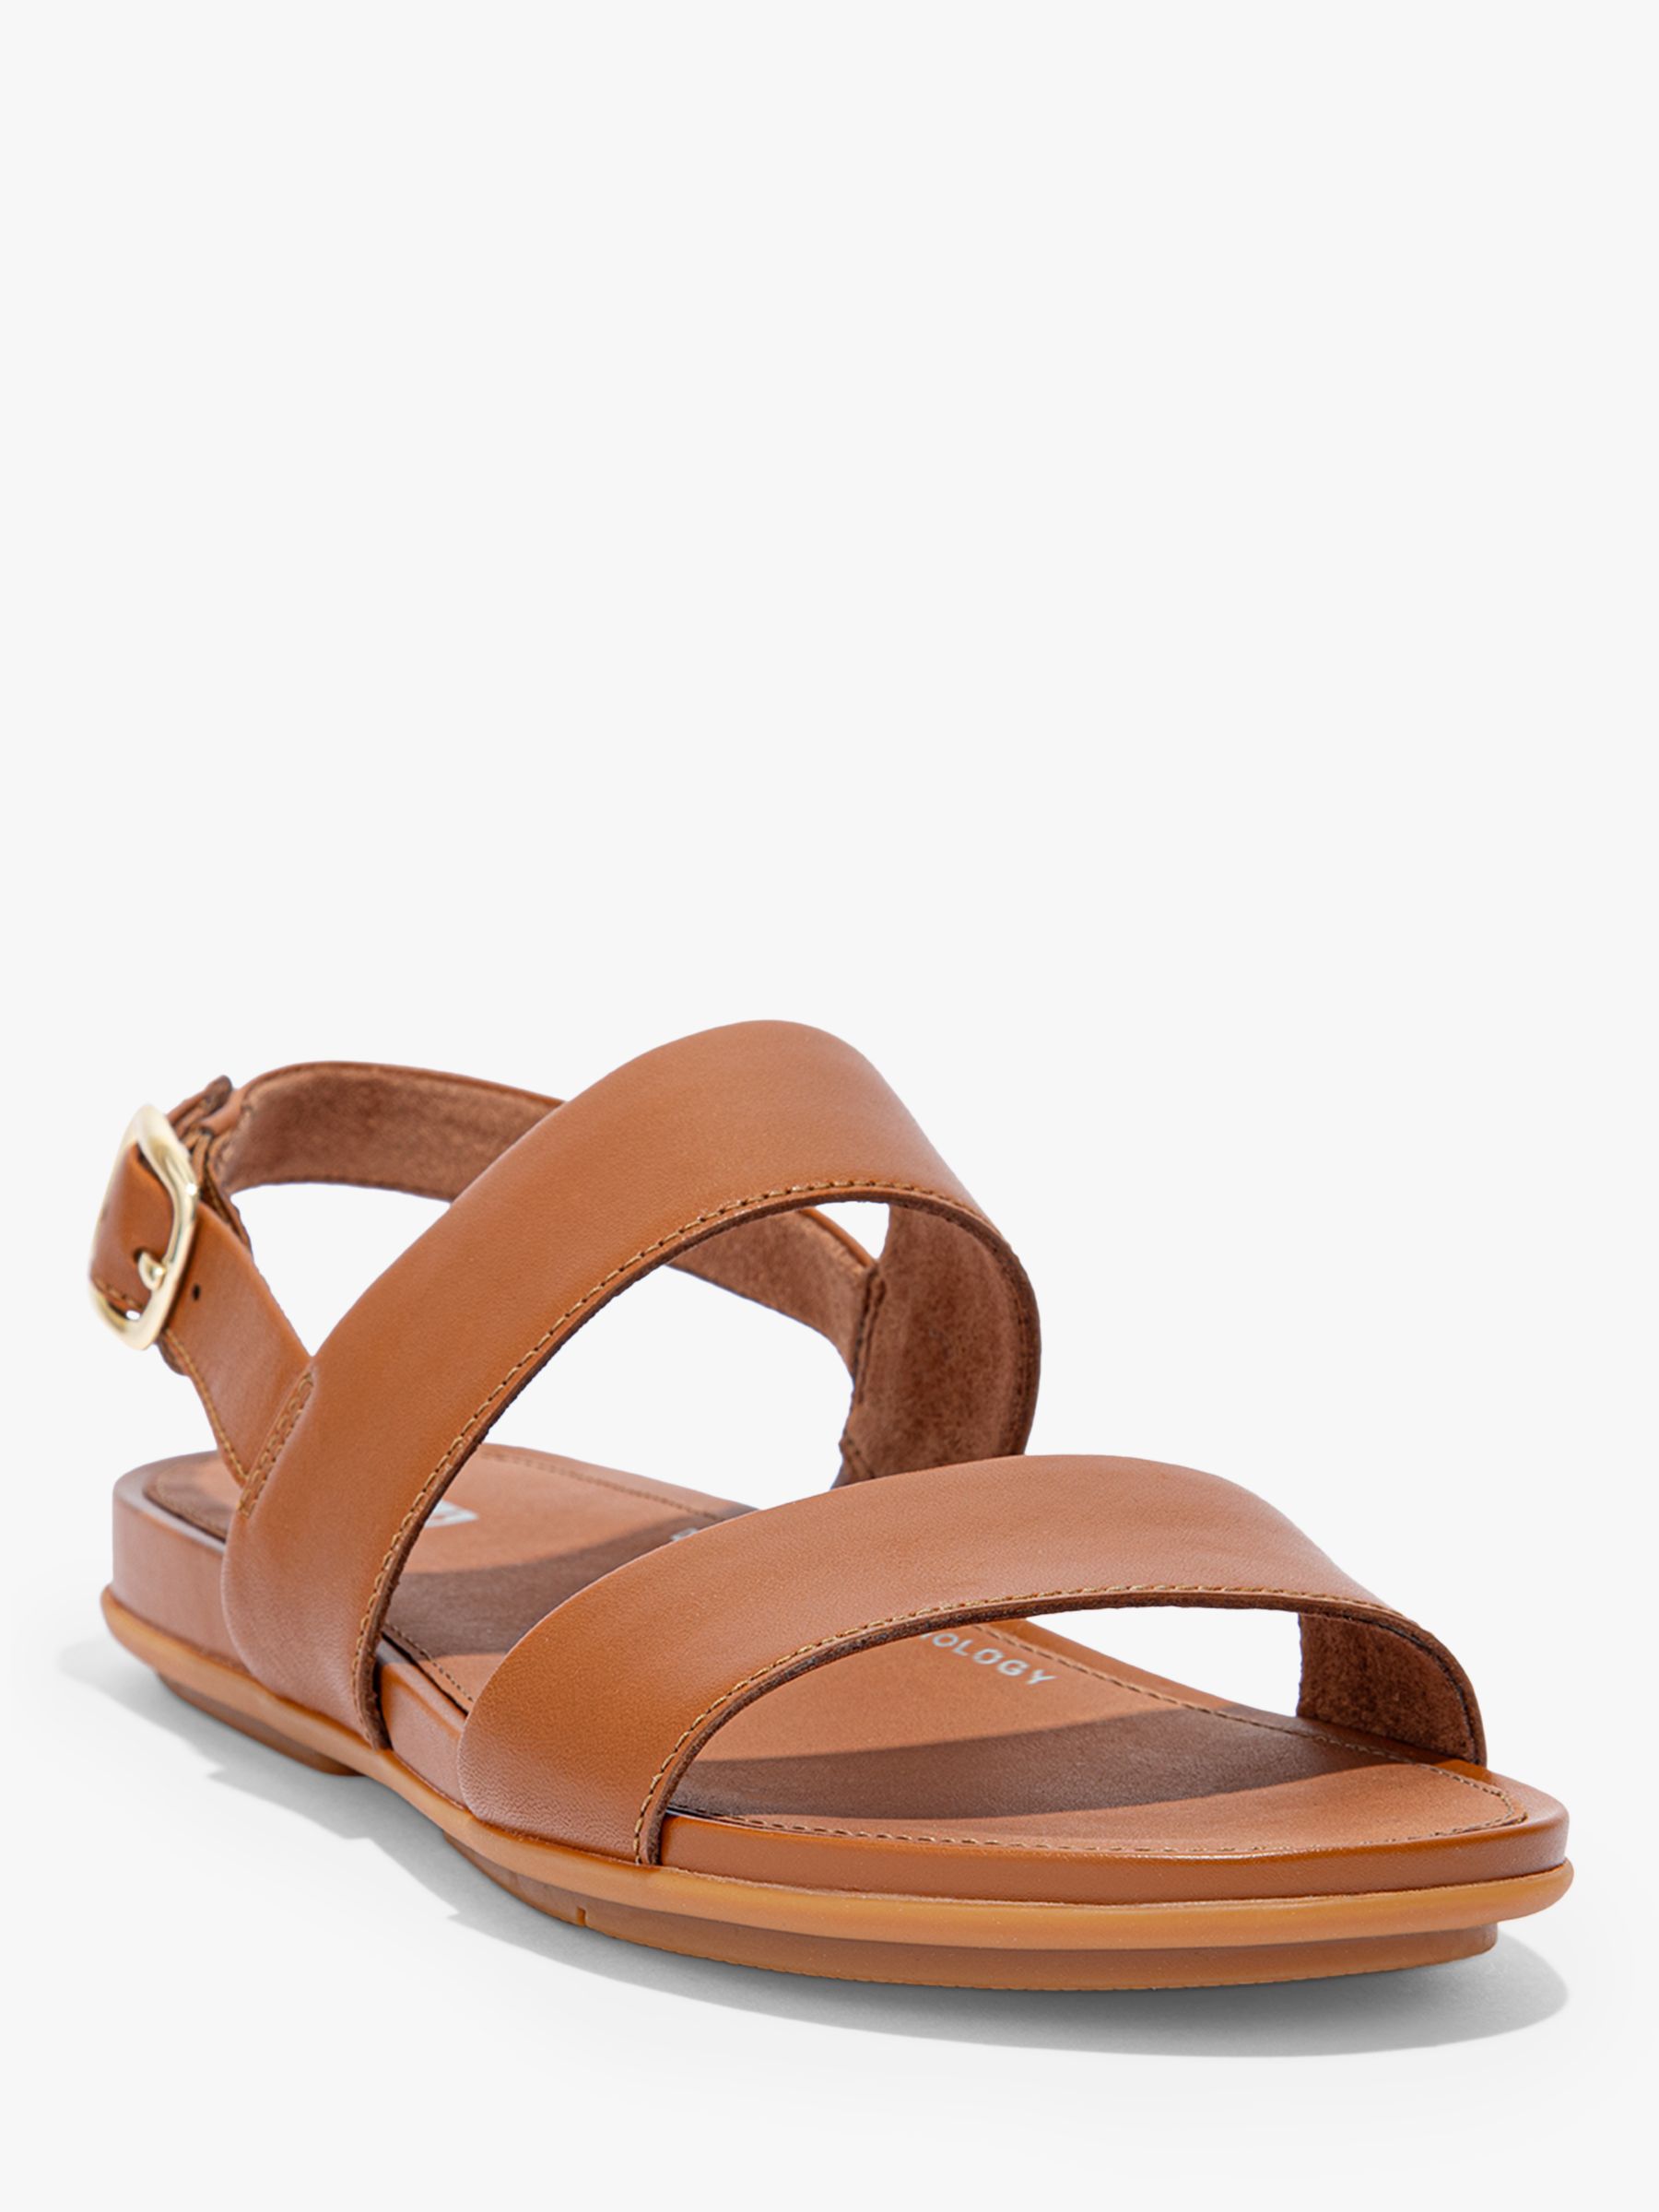 Buy FitFlop Gracie Leather Double Strap Sandals Online at johnlewis.com